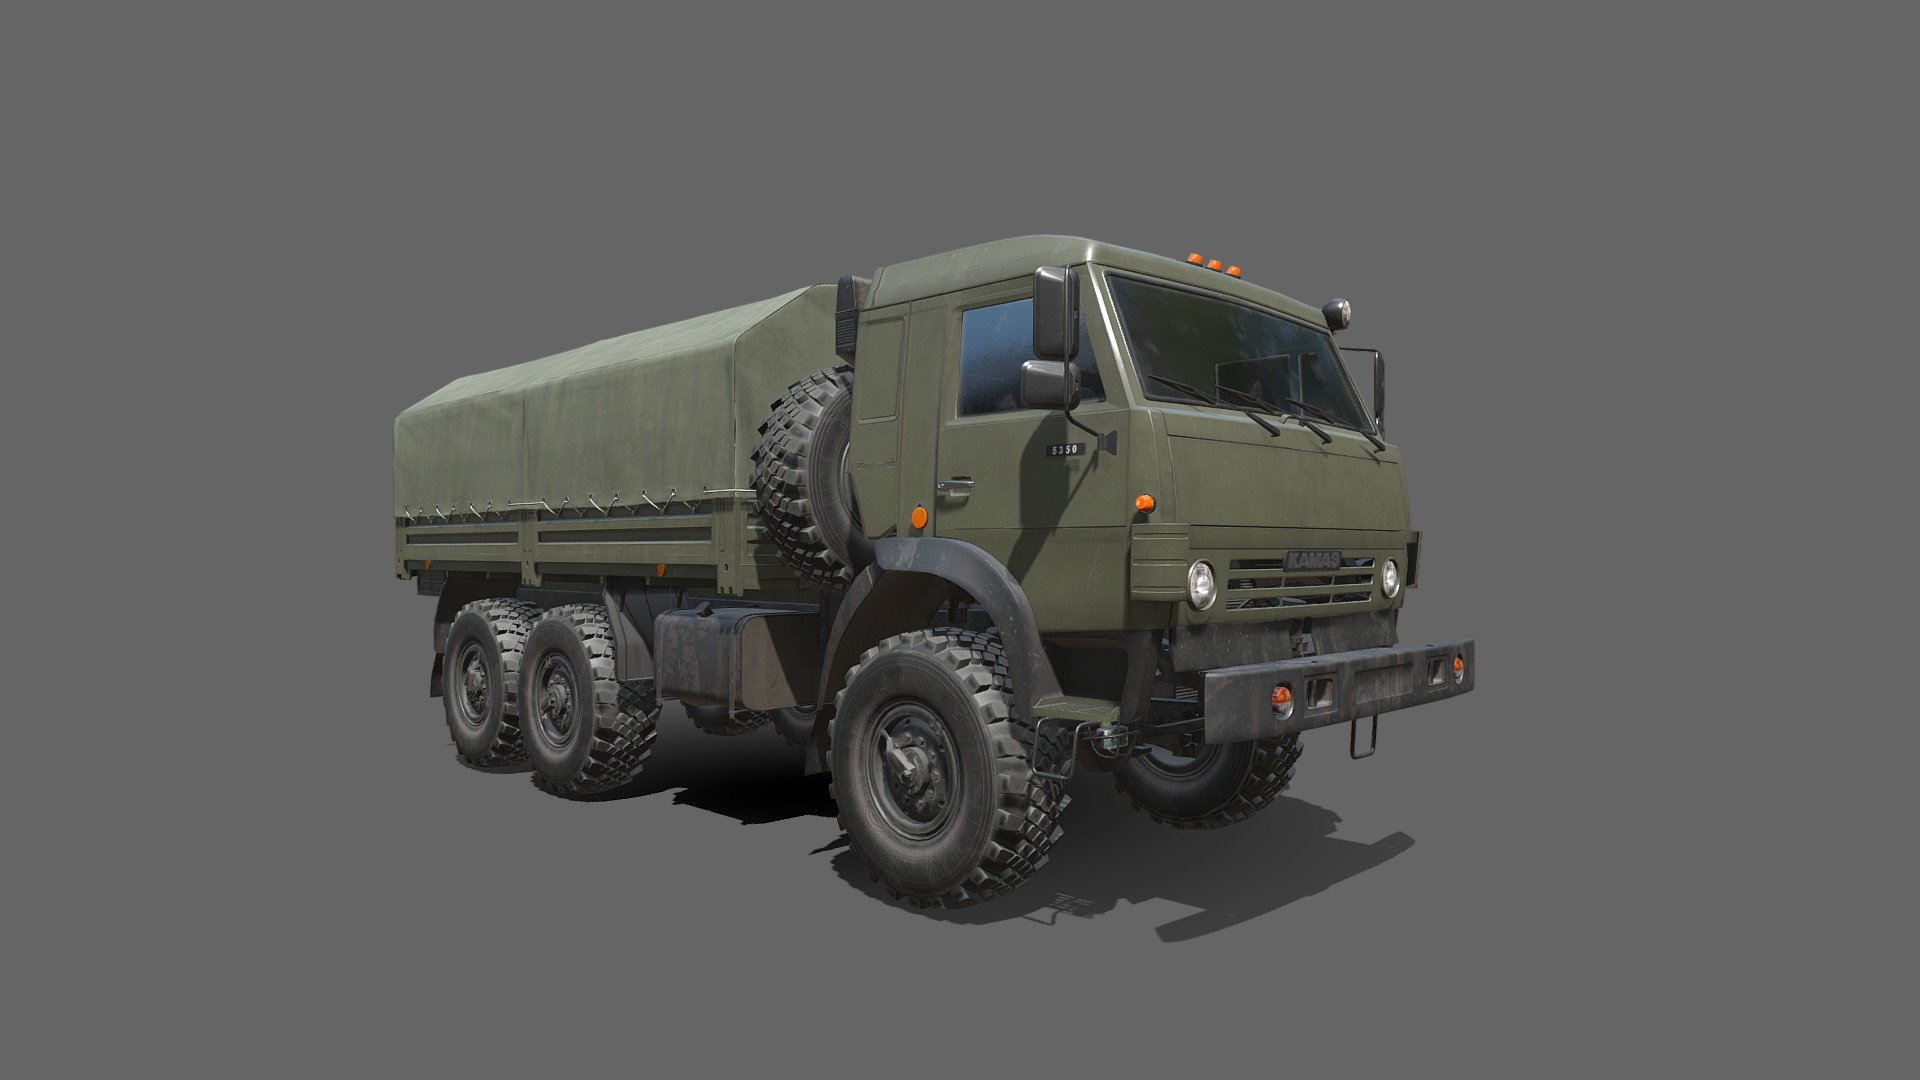 The KamAZ-5350 general utility truck is a member of Mustang family. This family of military trucks includes the KamAZ-4350 (4x4) and KamAZ-6350 (8x8) with numerous variants. This general utility truck is a further development of the KamAZ-4310, which was launched in the early 1980s. It was officially accepted to service with the Russian Army in 2002 and a small-scale production commenced in 2003.
  The KamAZ-5350 is entirely conventional in design. Vehicle has a payload capacity of 6 000 kg and can also tow trailers or artillery pieces. This military truck can carry a variety of shelters or container-type loads. A standard troop/cargo platform has drop sides, drop tailgate and removable tarpaulin with bows 3d model